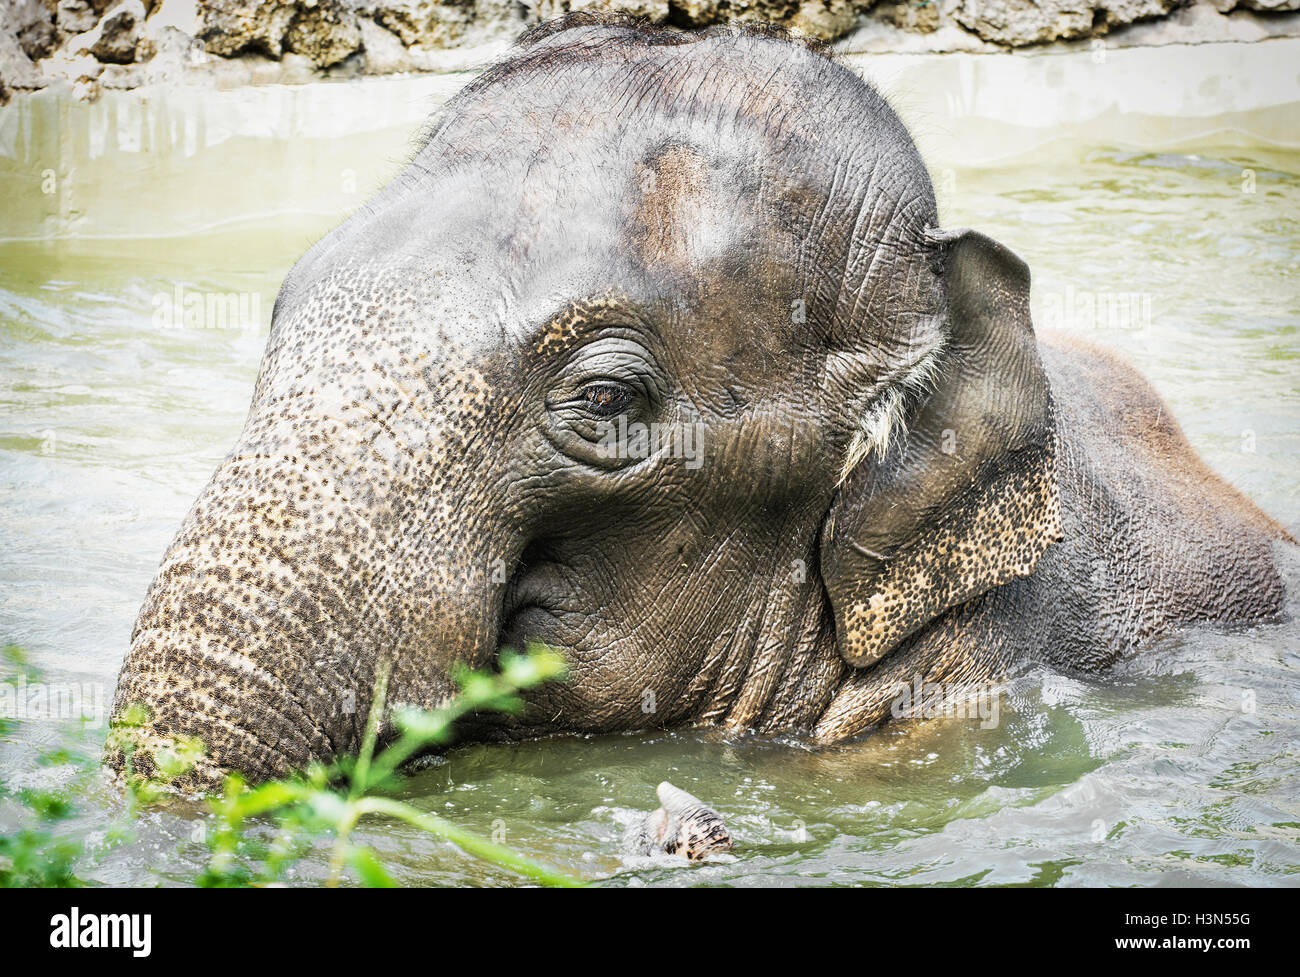 Elephant taking a refreshing dip in the water. Animal theme. Beauty in ...